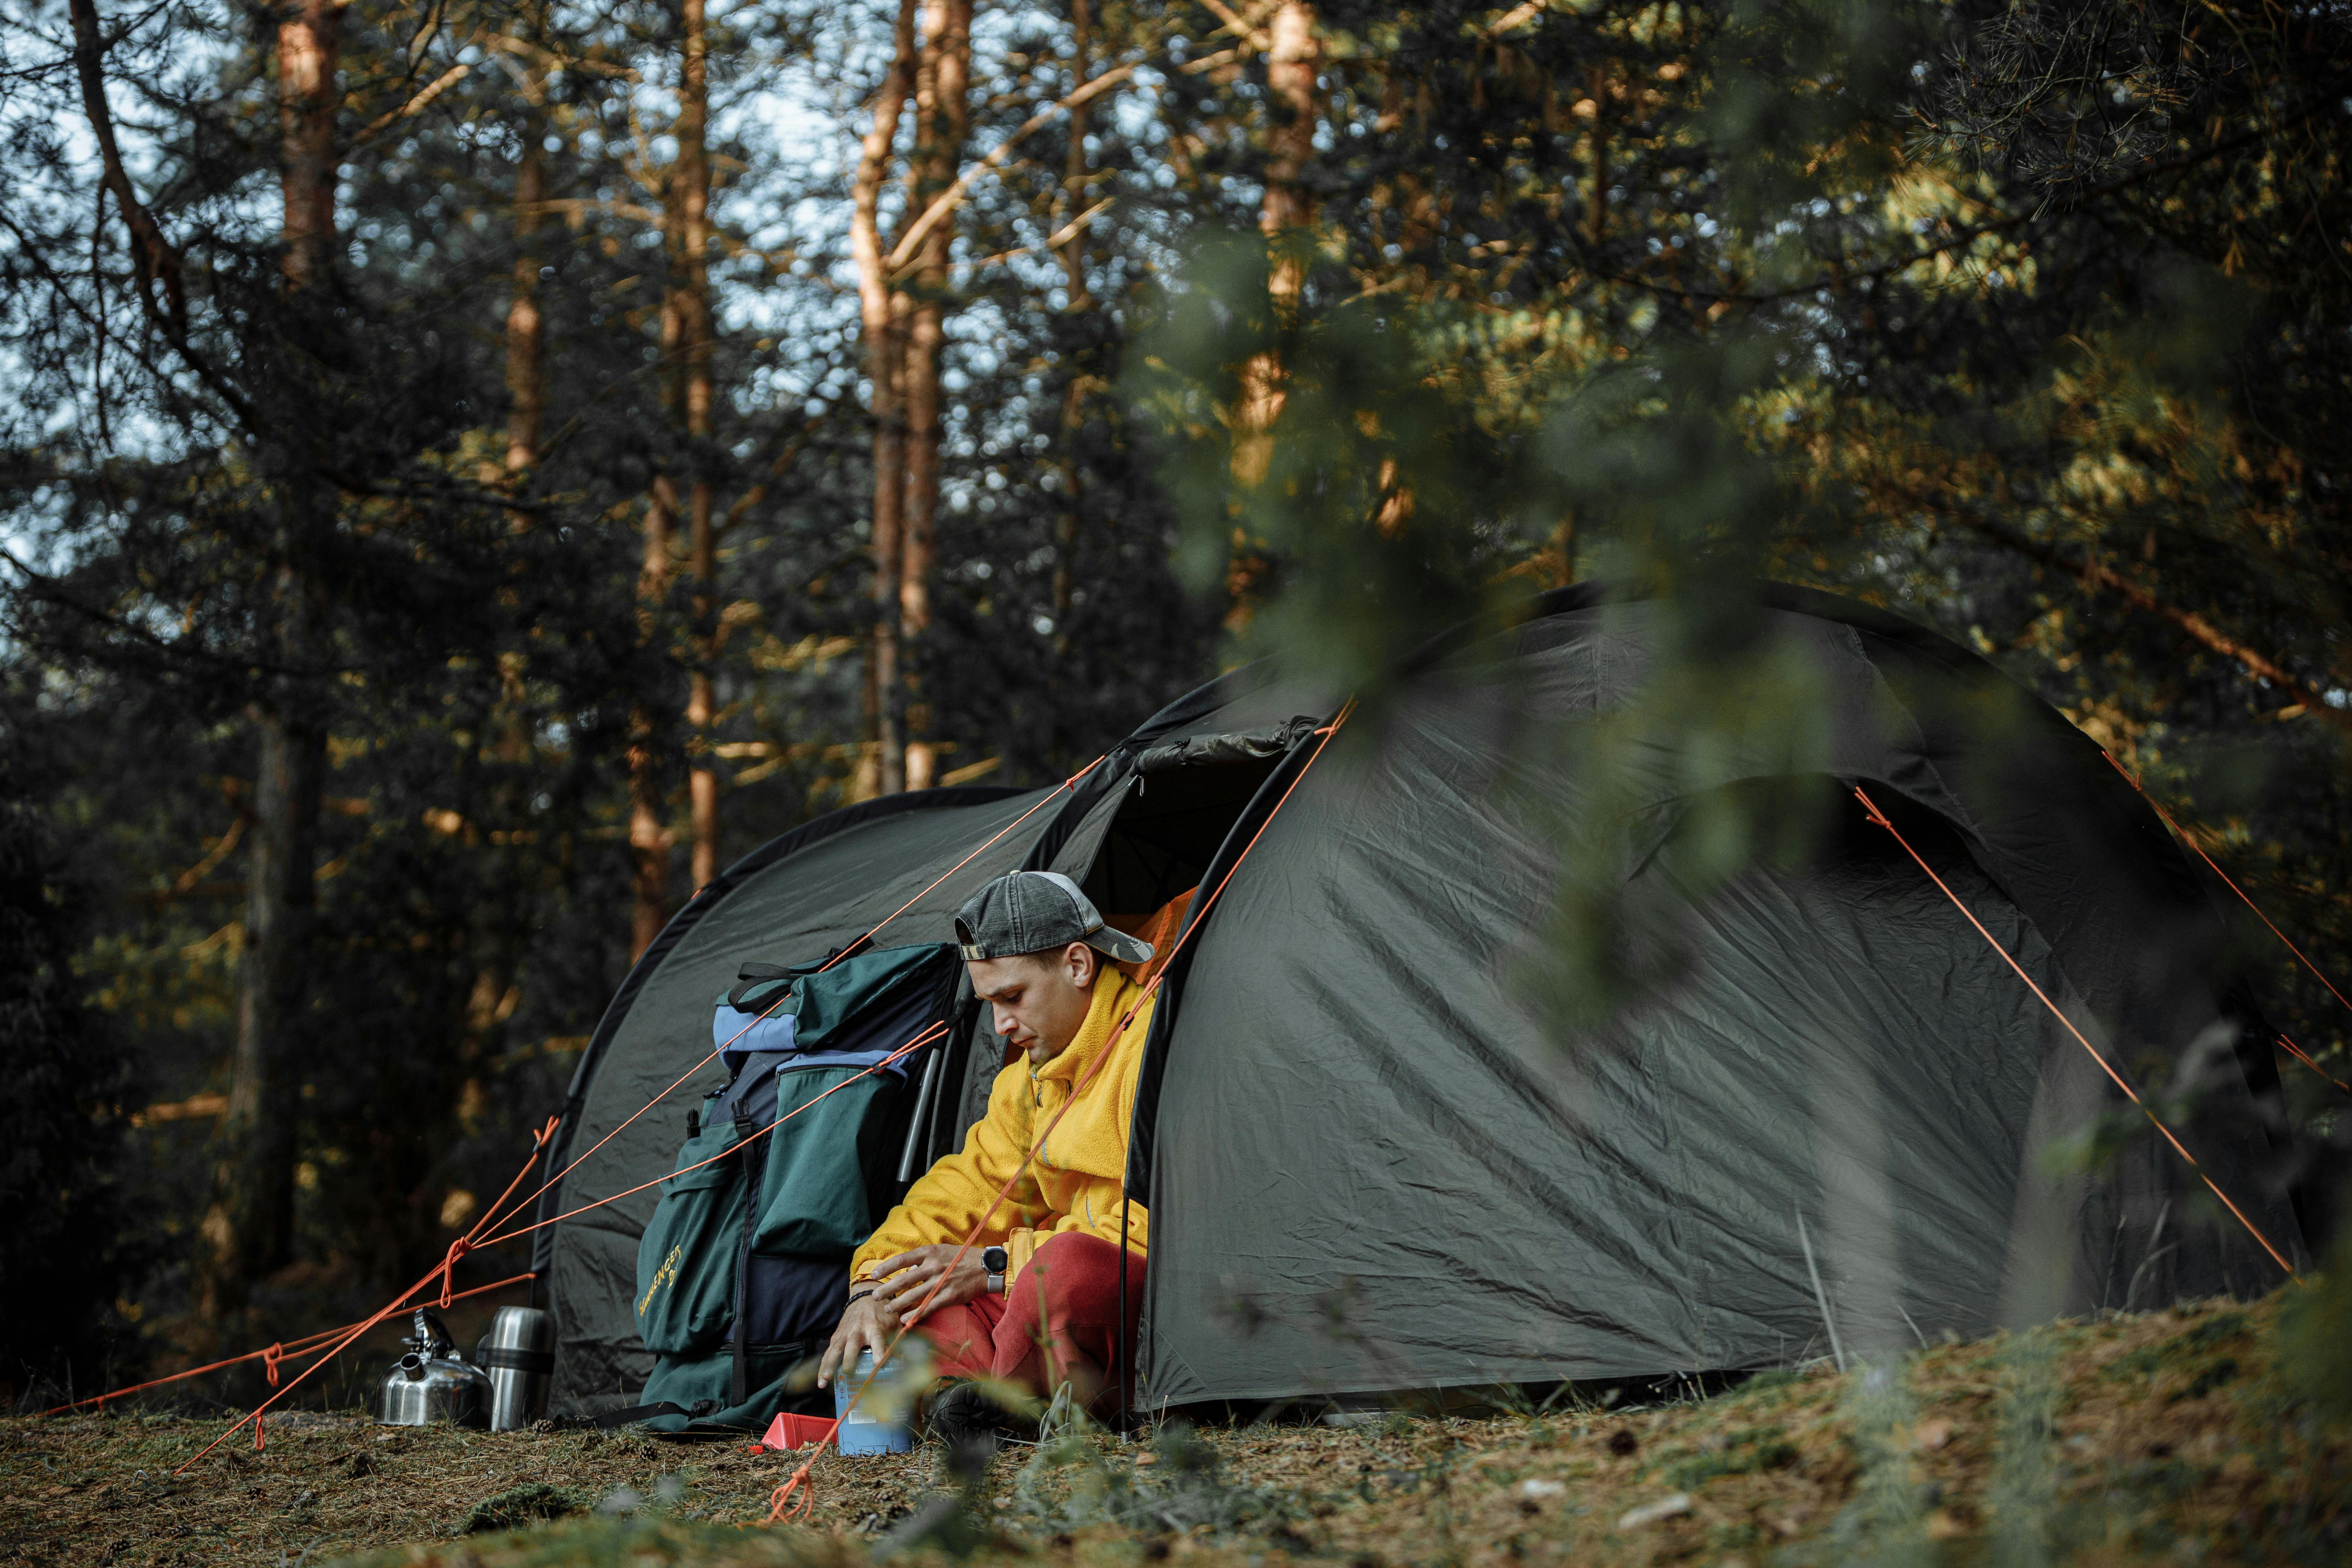 Ultralight Camping Gear: Packing Light for the Great Outdoors